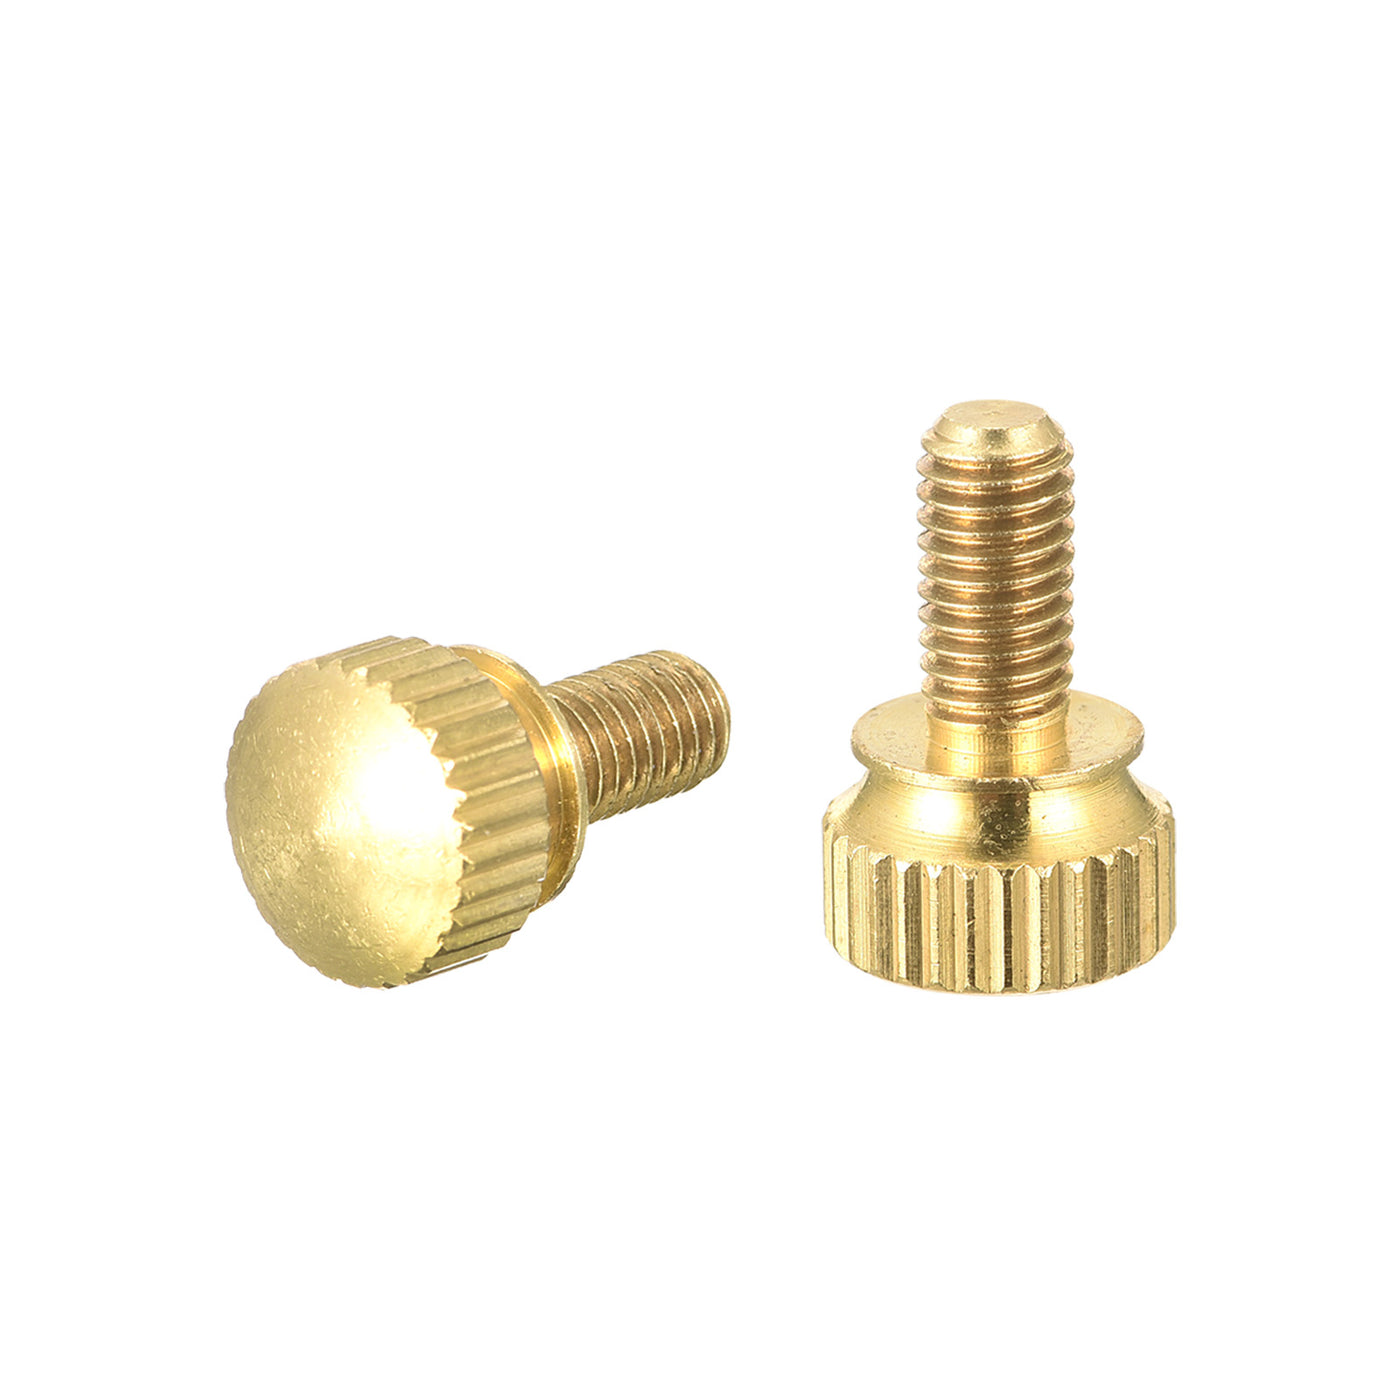 uxcell Uxcell 2Pcs Knurled Thumb Screws, M5x10mm Brass Shoulder Bolts Stepped Grip Knobs Fasteners for PC, Electronic, Mechanical